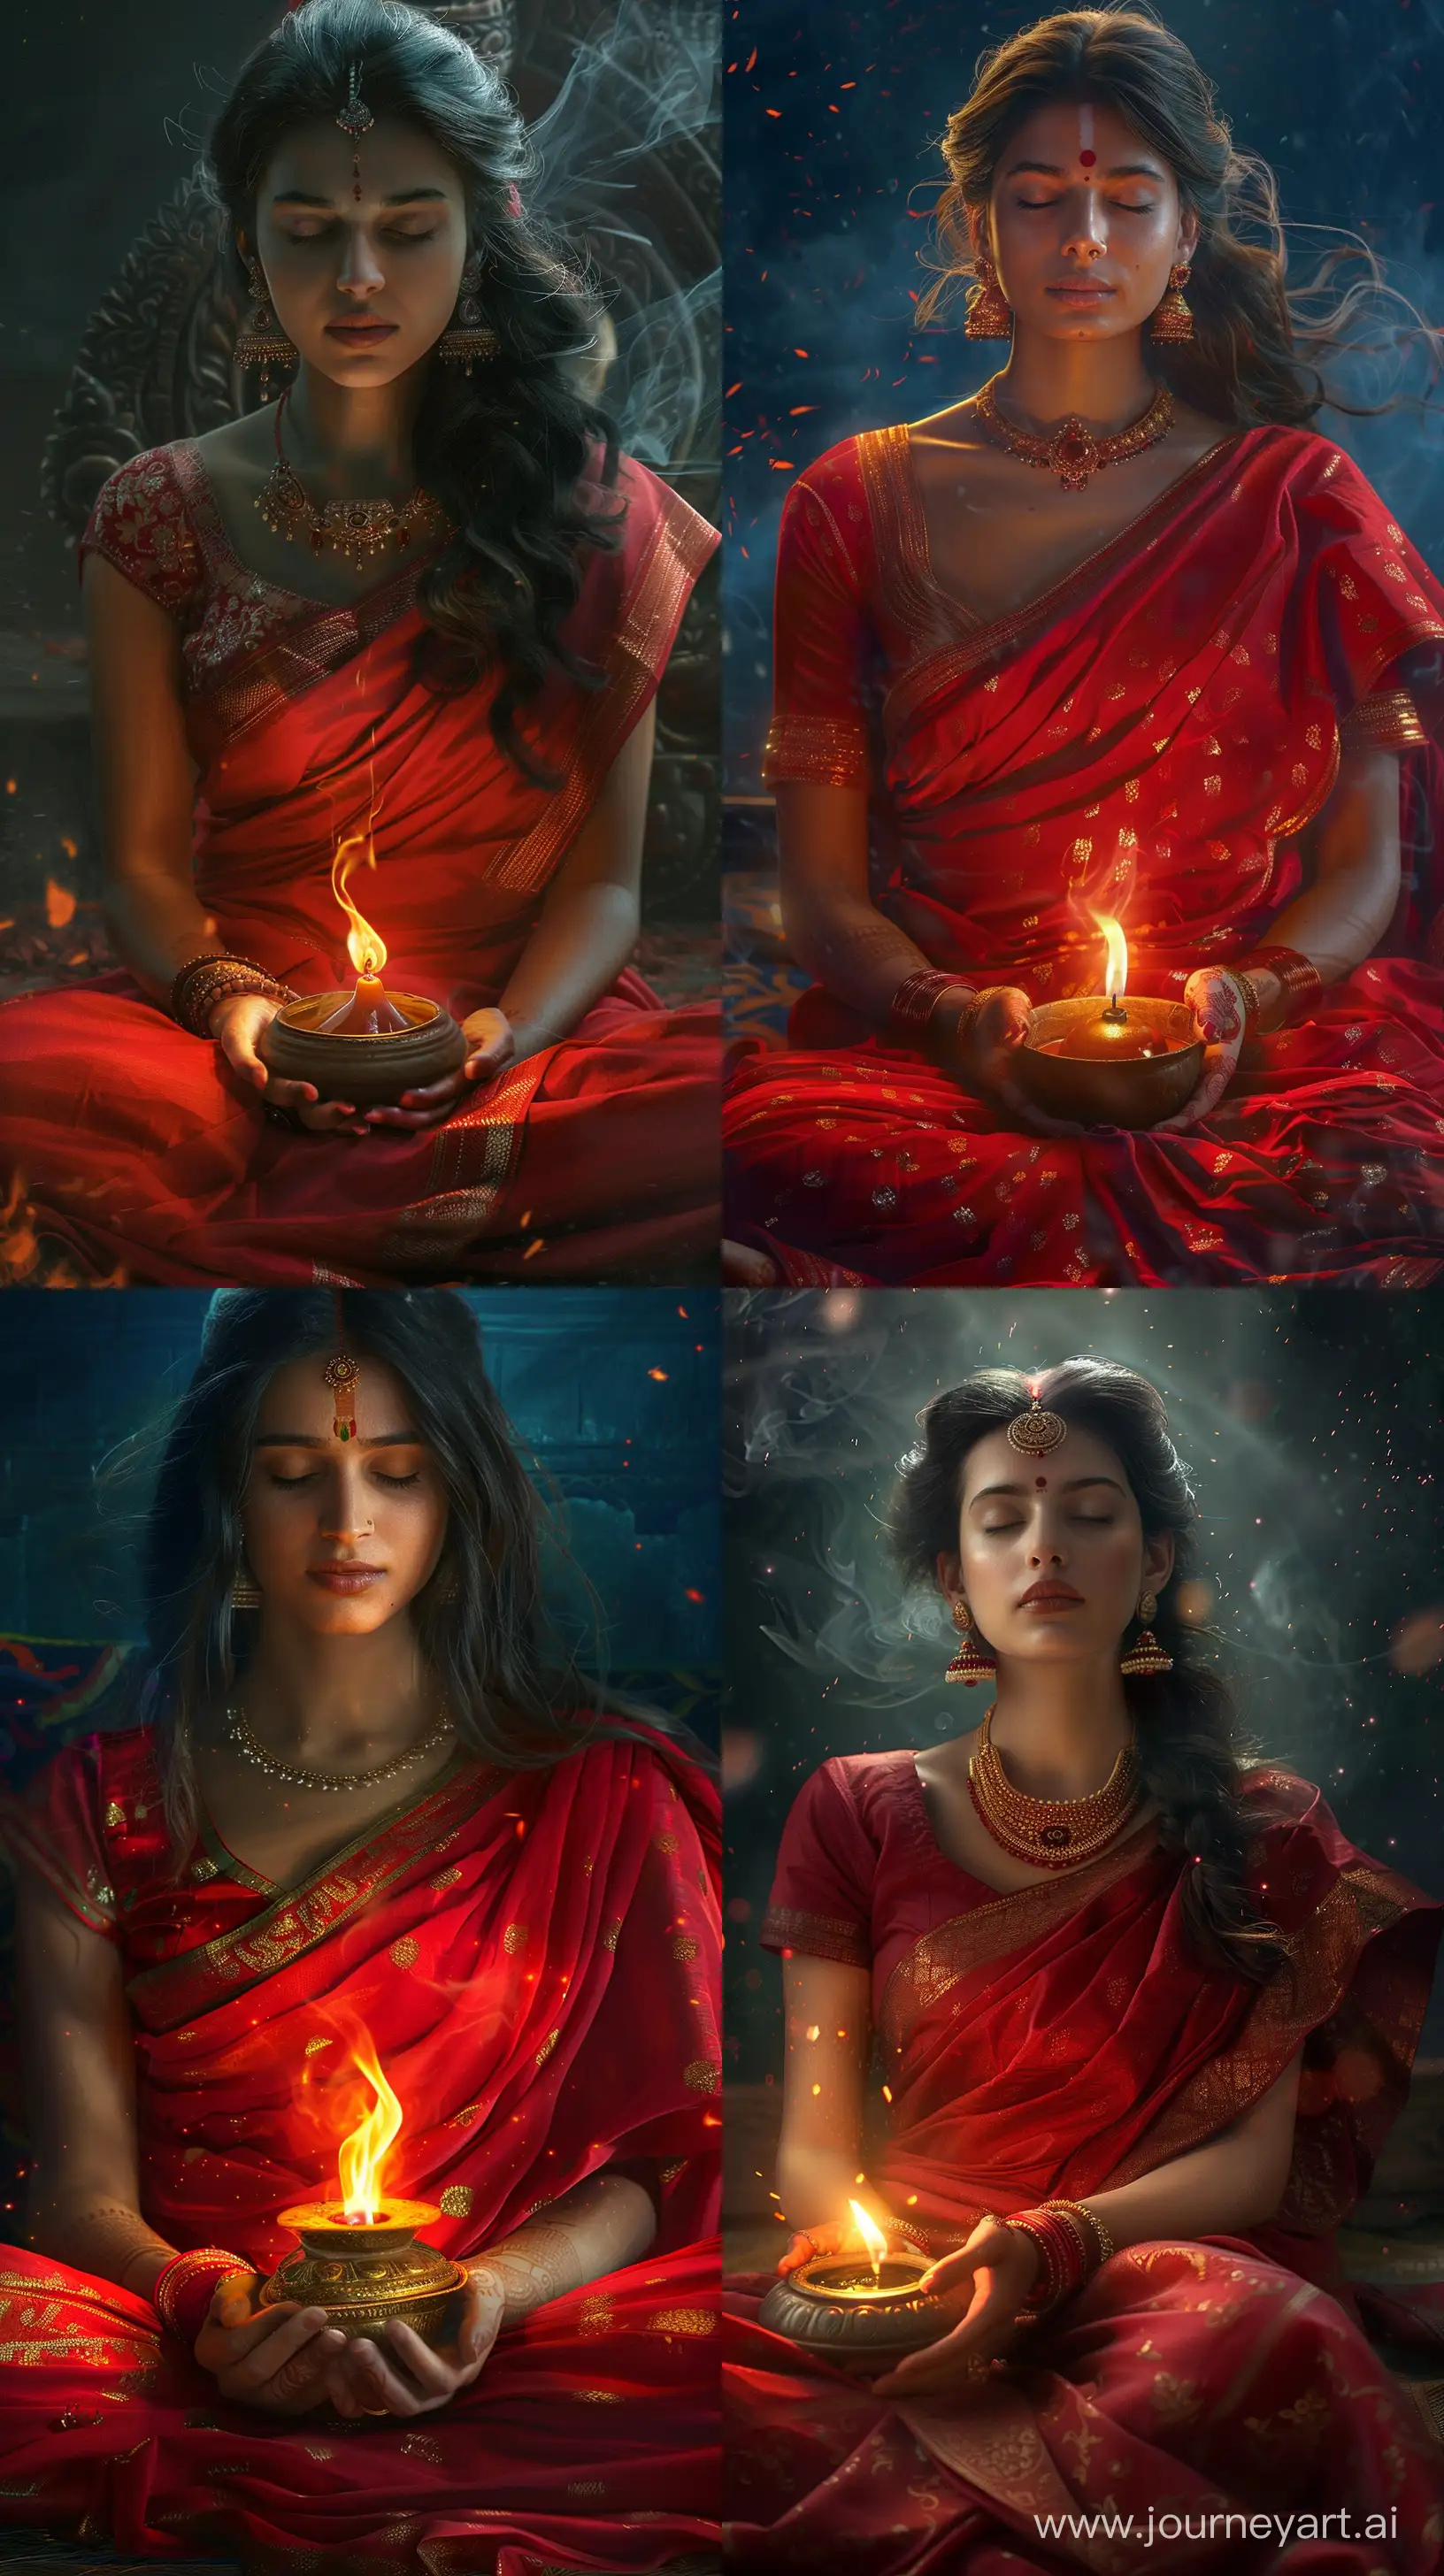 Ancient-Indian-Woman-in-Red-Saree-Holding-Lit-Oil-Lamp